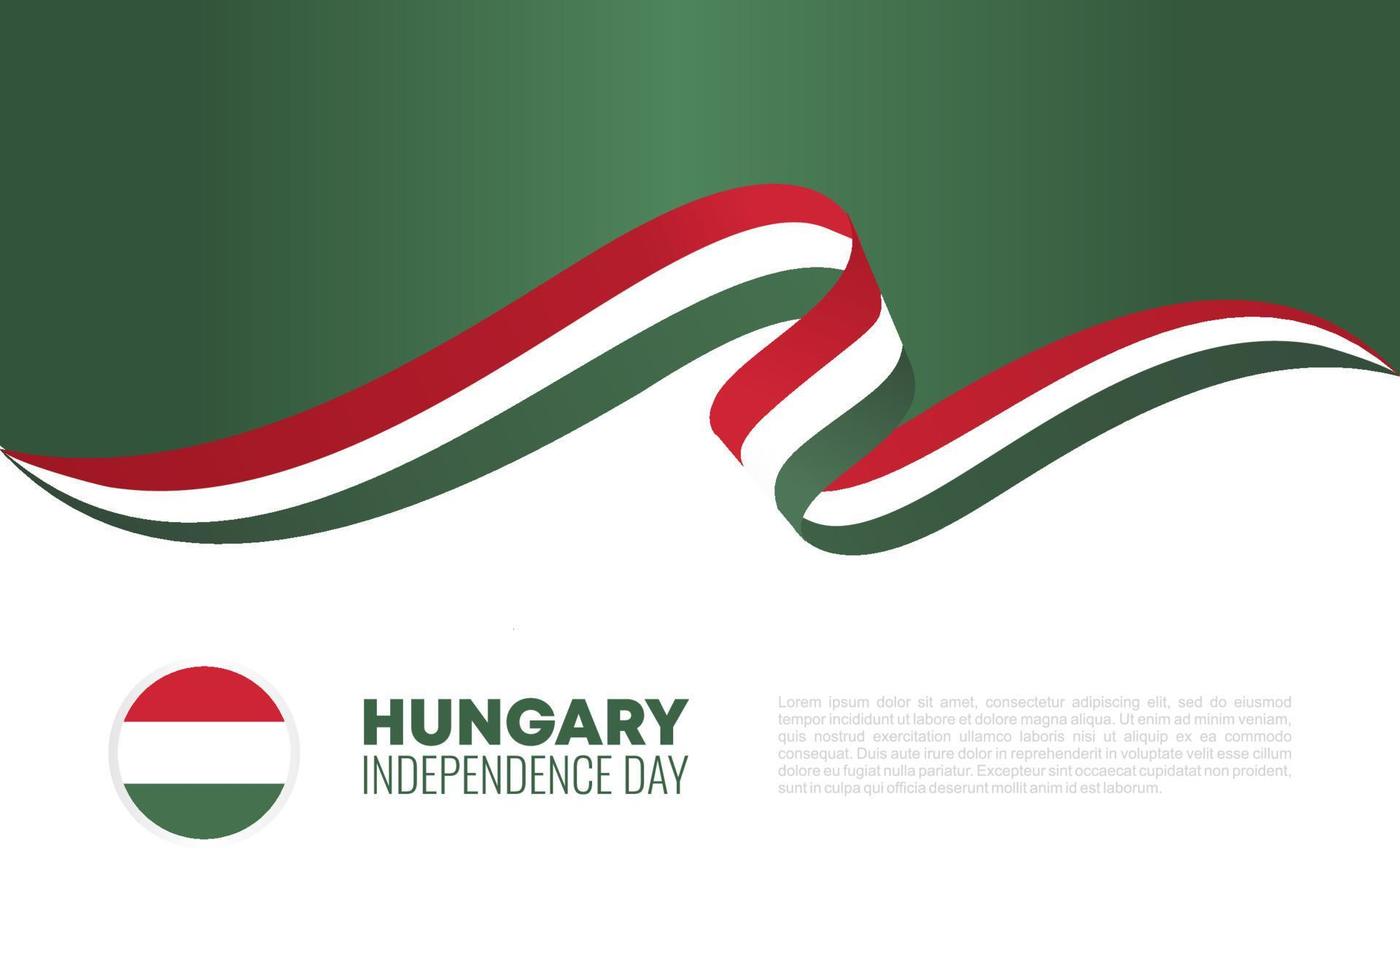 Hungary independence day for national celebration on March 22 vector